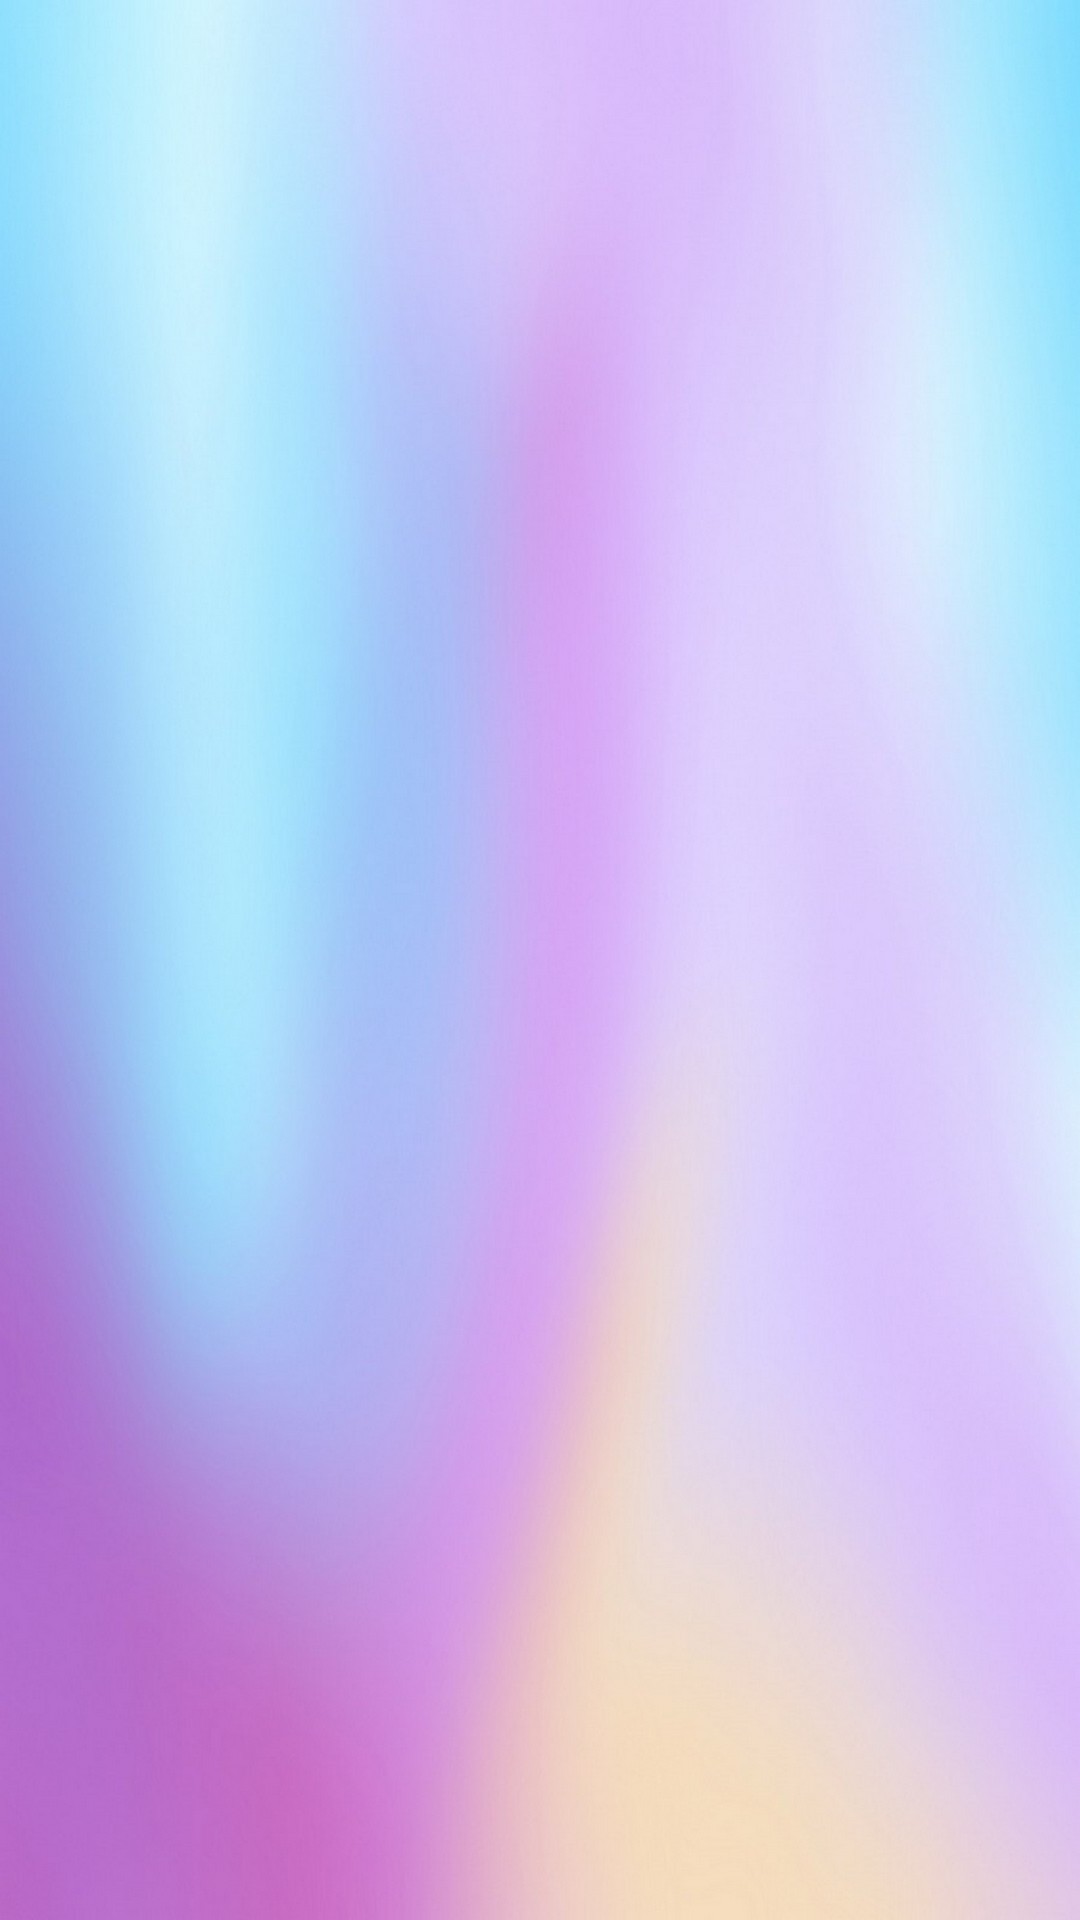 Wallpaper Android Gradient with high-resolution 1080x1920 pixel. You can use this wallpaper for your Android backgrounds, Tablet, Samsung Screensavers, Mobile Phone Lock Screen and another Smartphones device